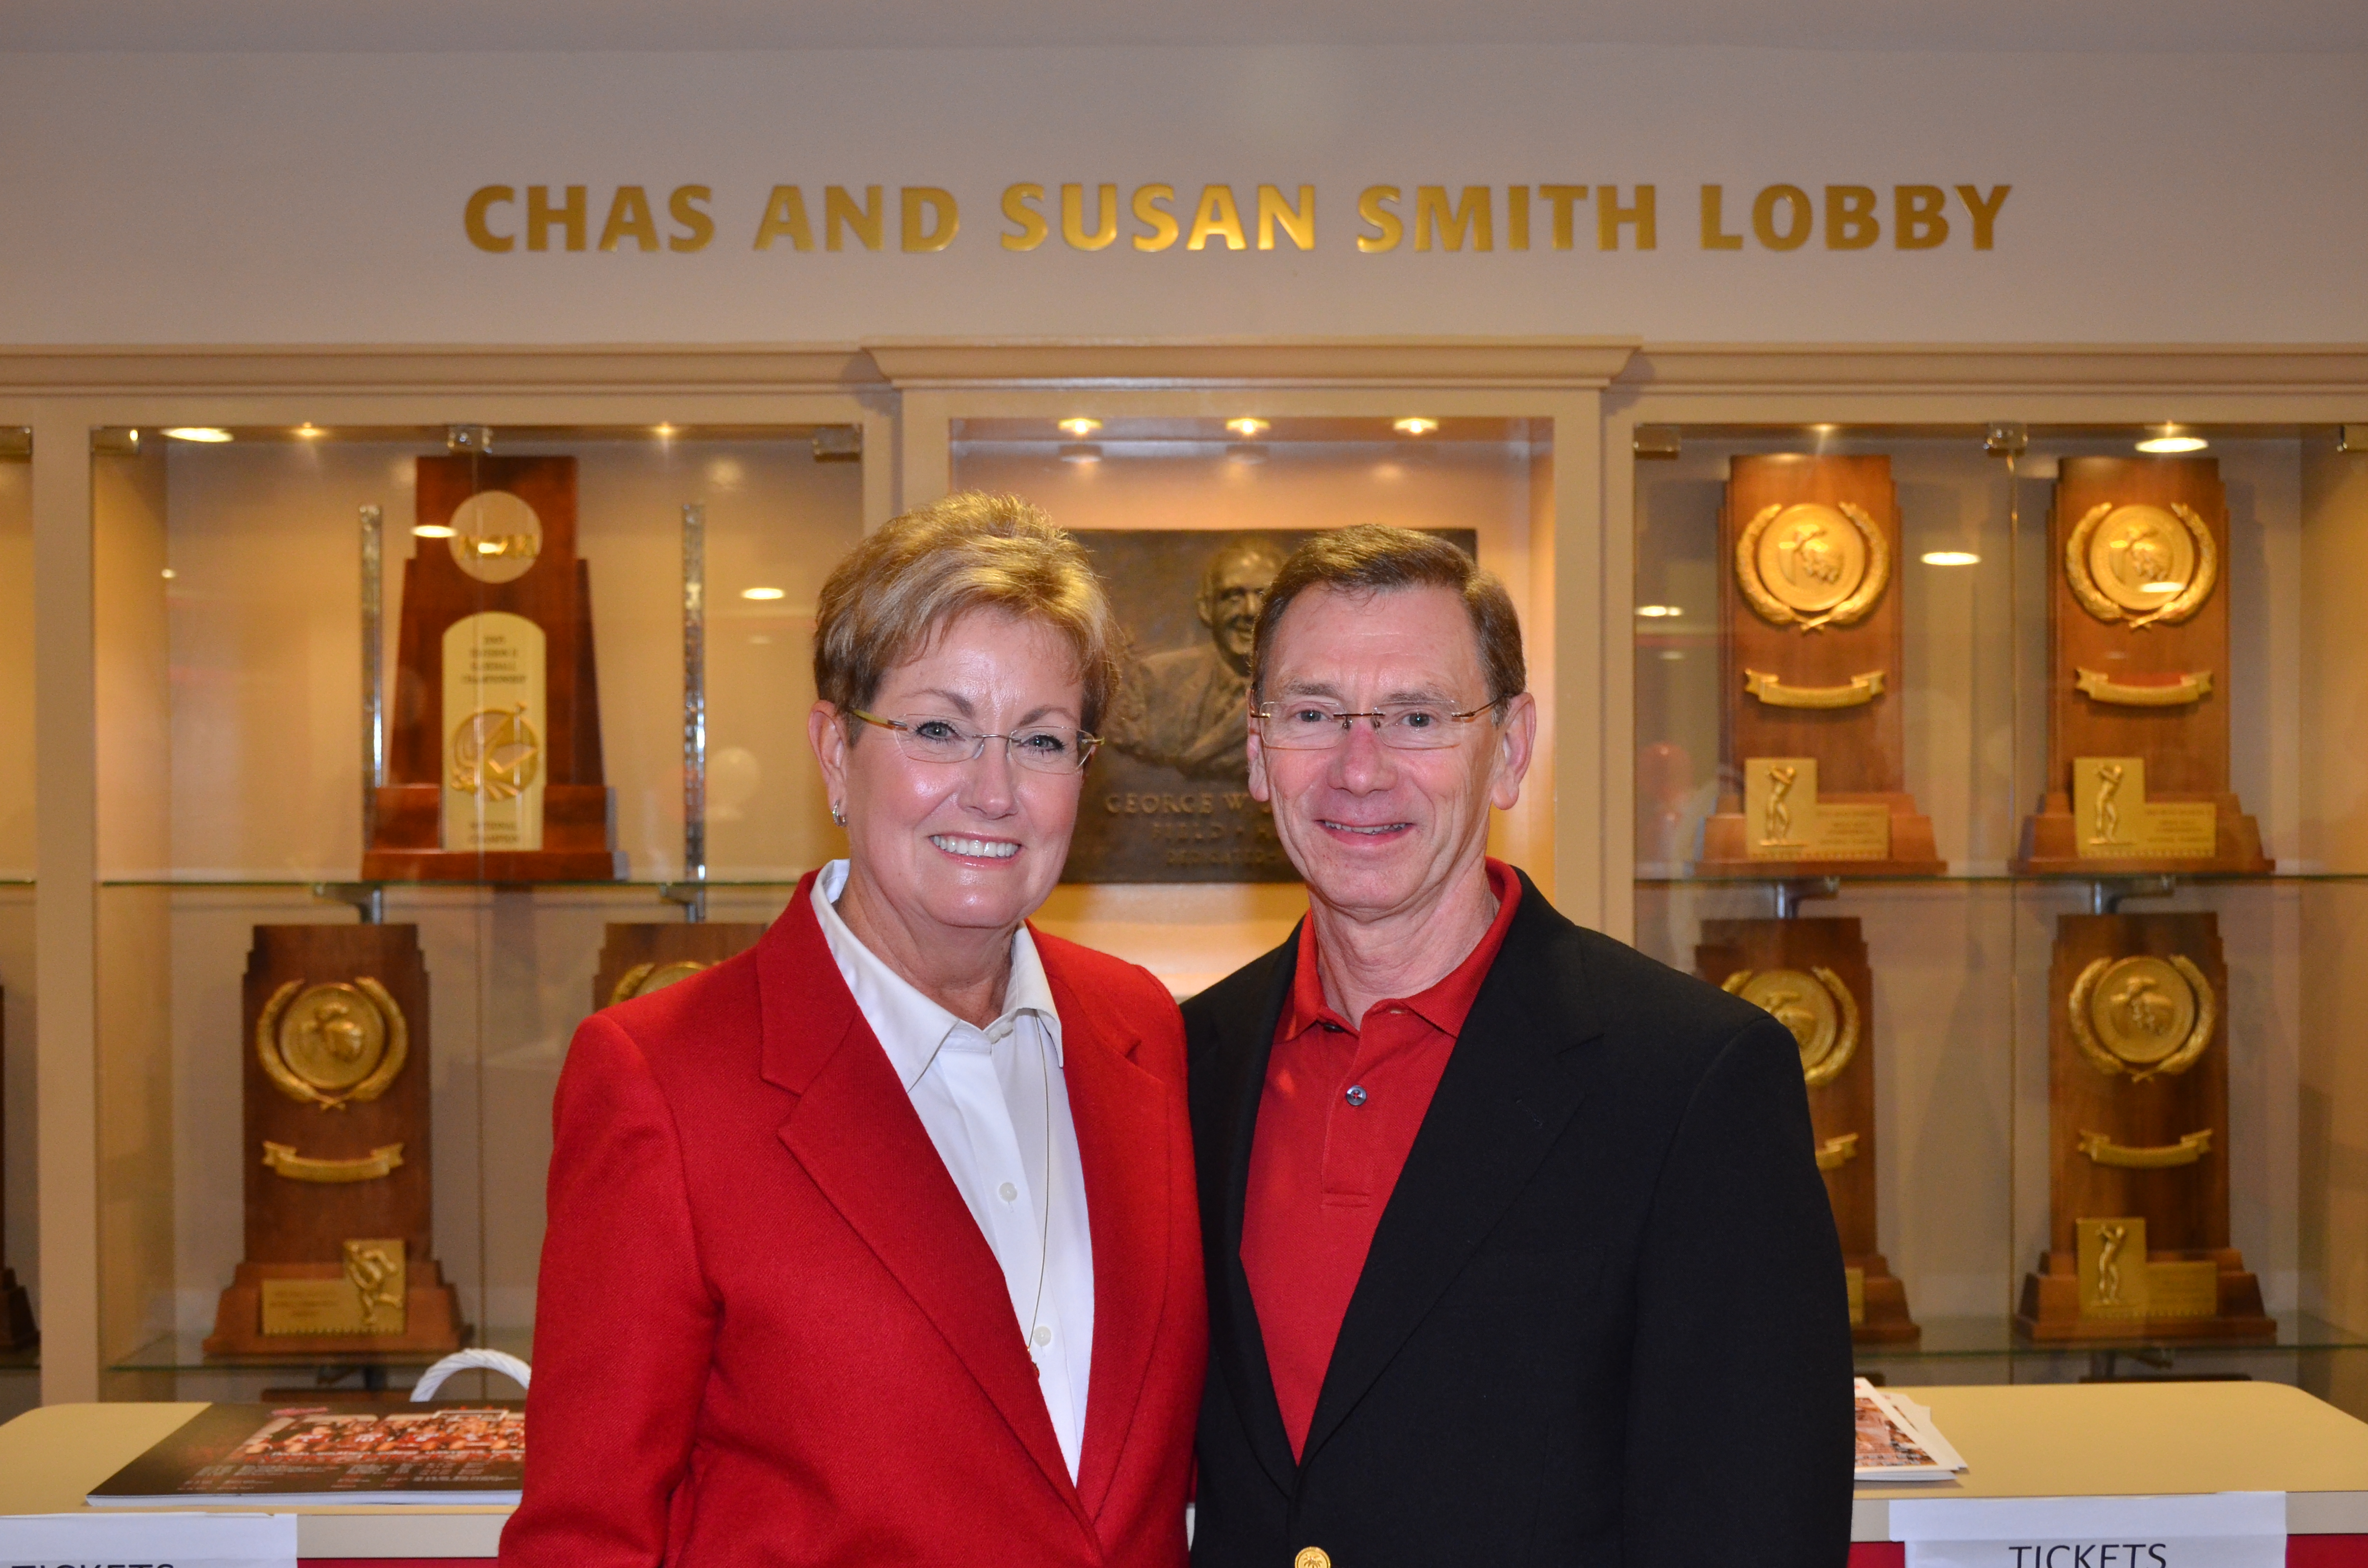 Chas and Susan Smith Lobby